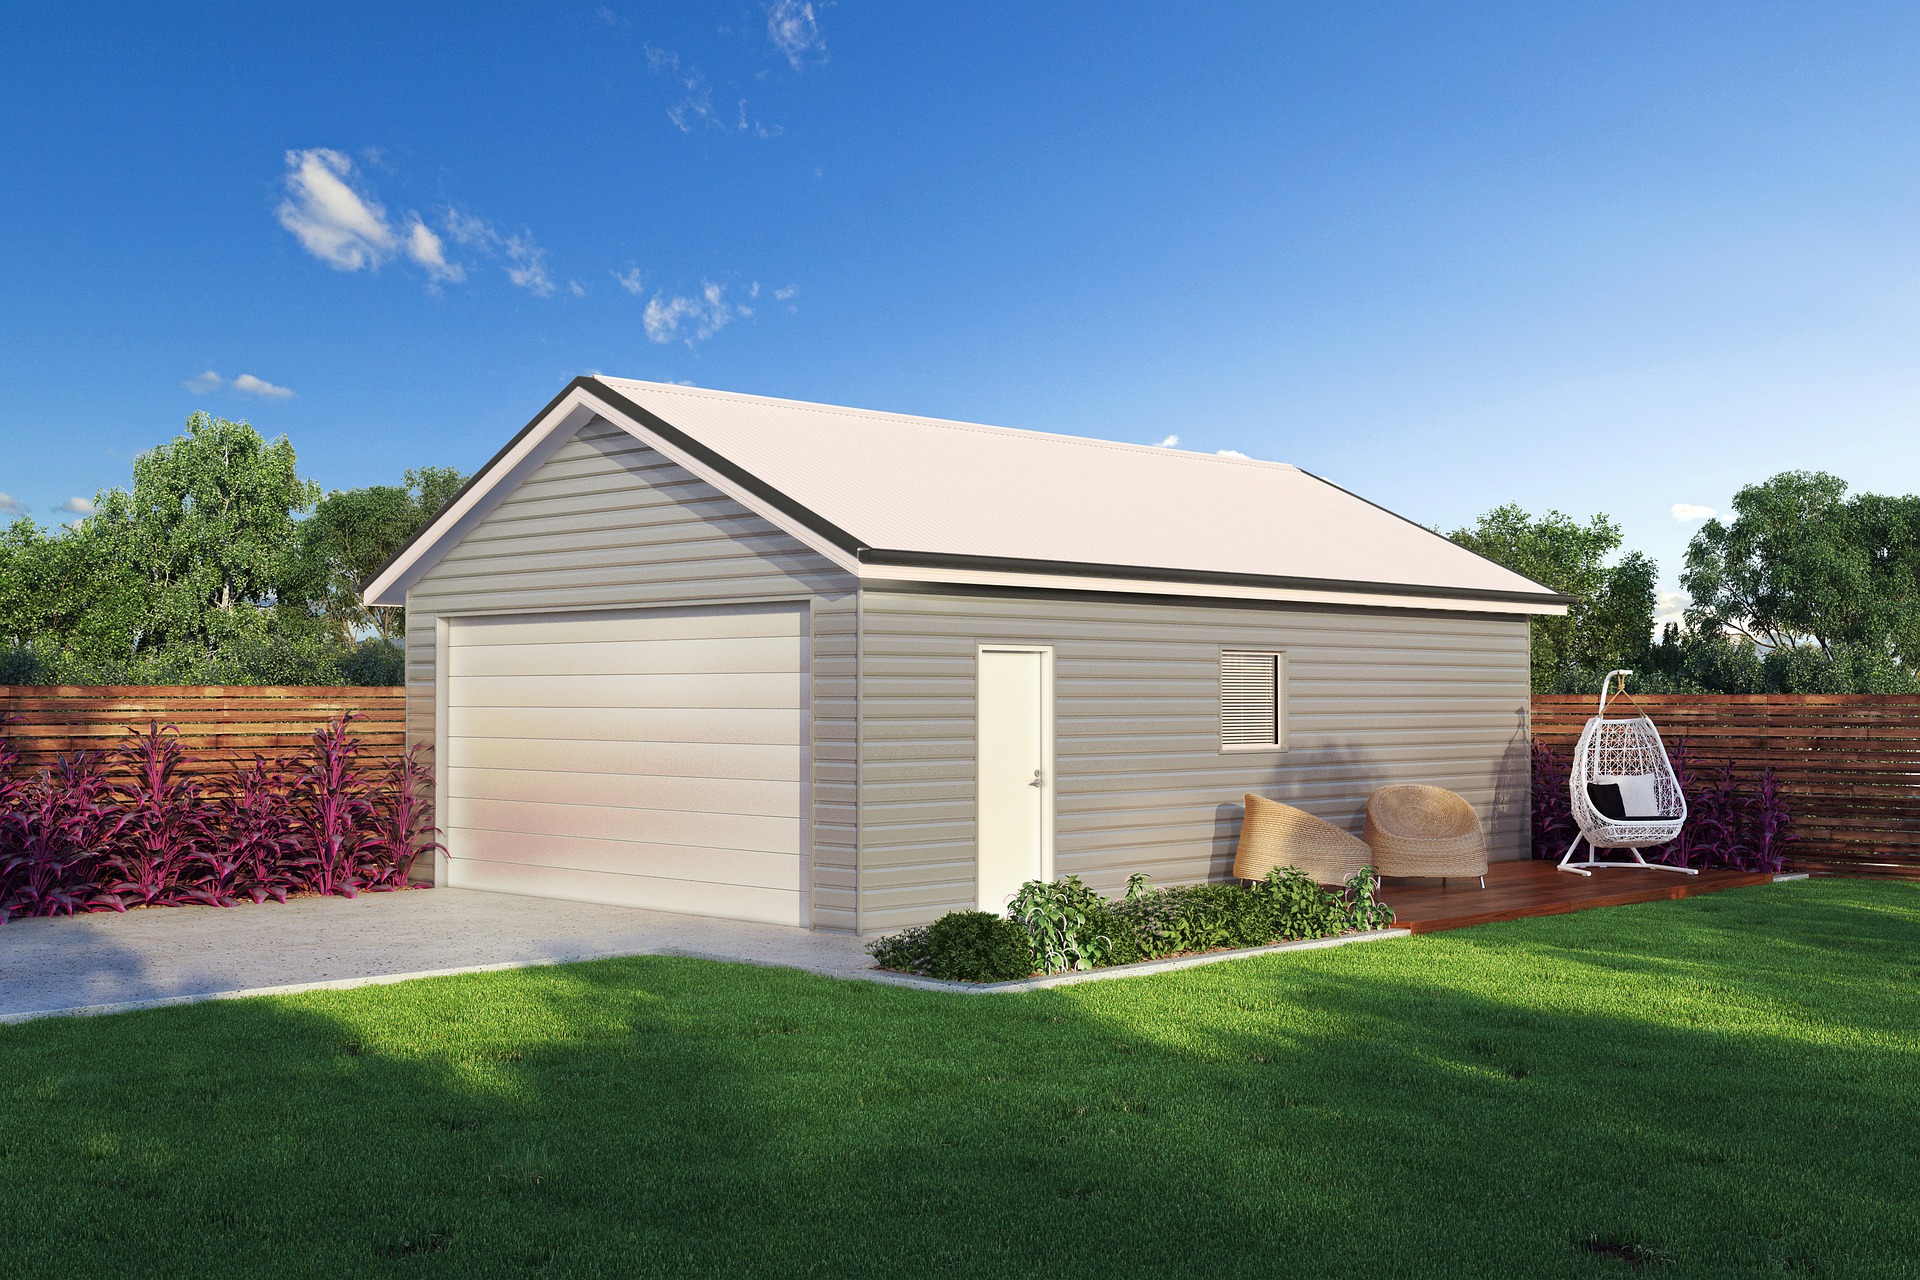 How to Pick the Correct Size Detached Garage